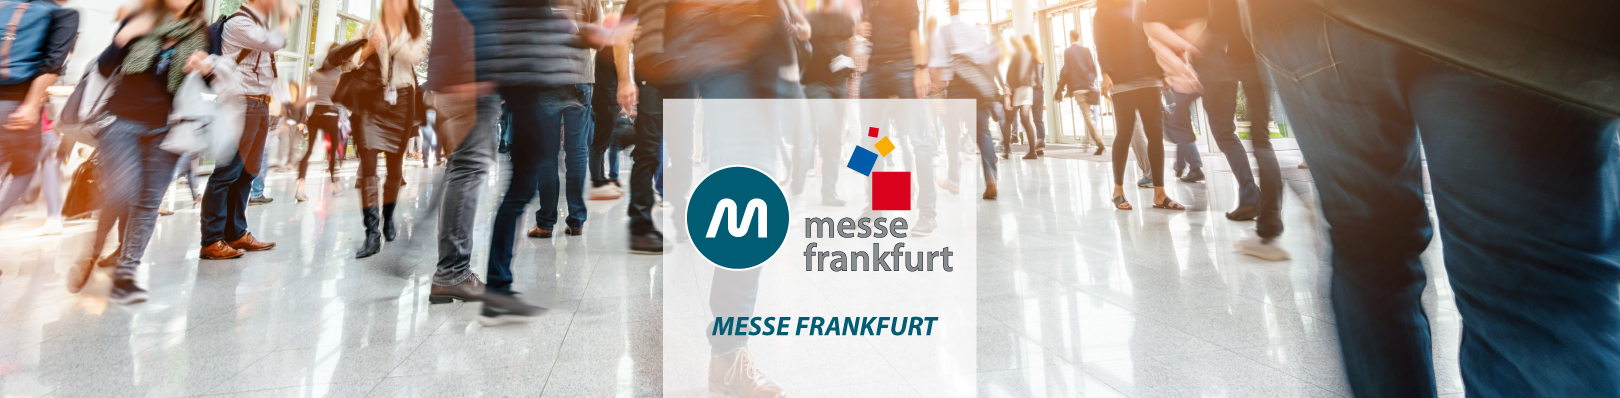 Messe frankfurt banner for hmi-ad page | Trade shows in Messe frankfurt in Germany 2024 | Gift items supplier in Frankfurt 2024 | HMi GmbH